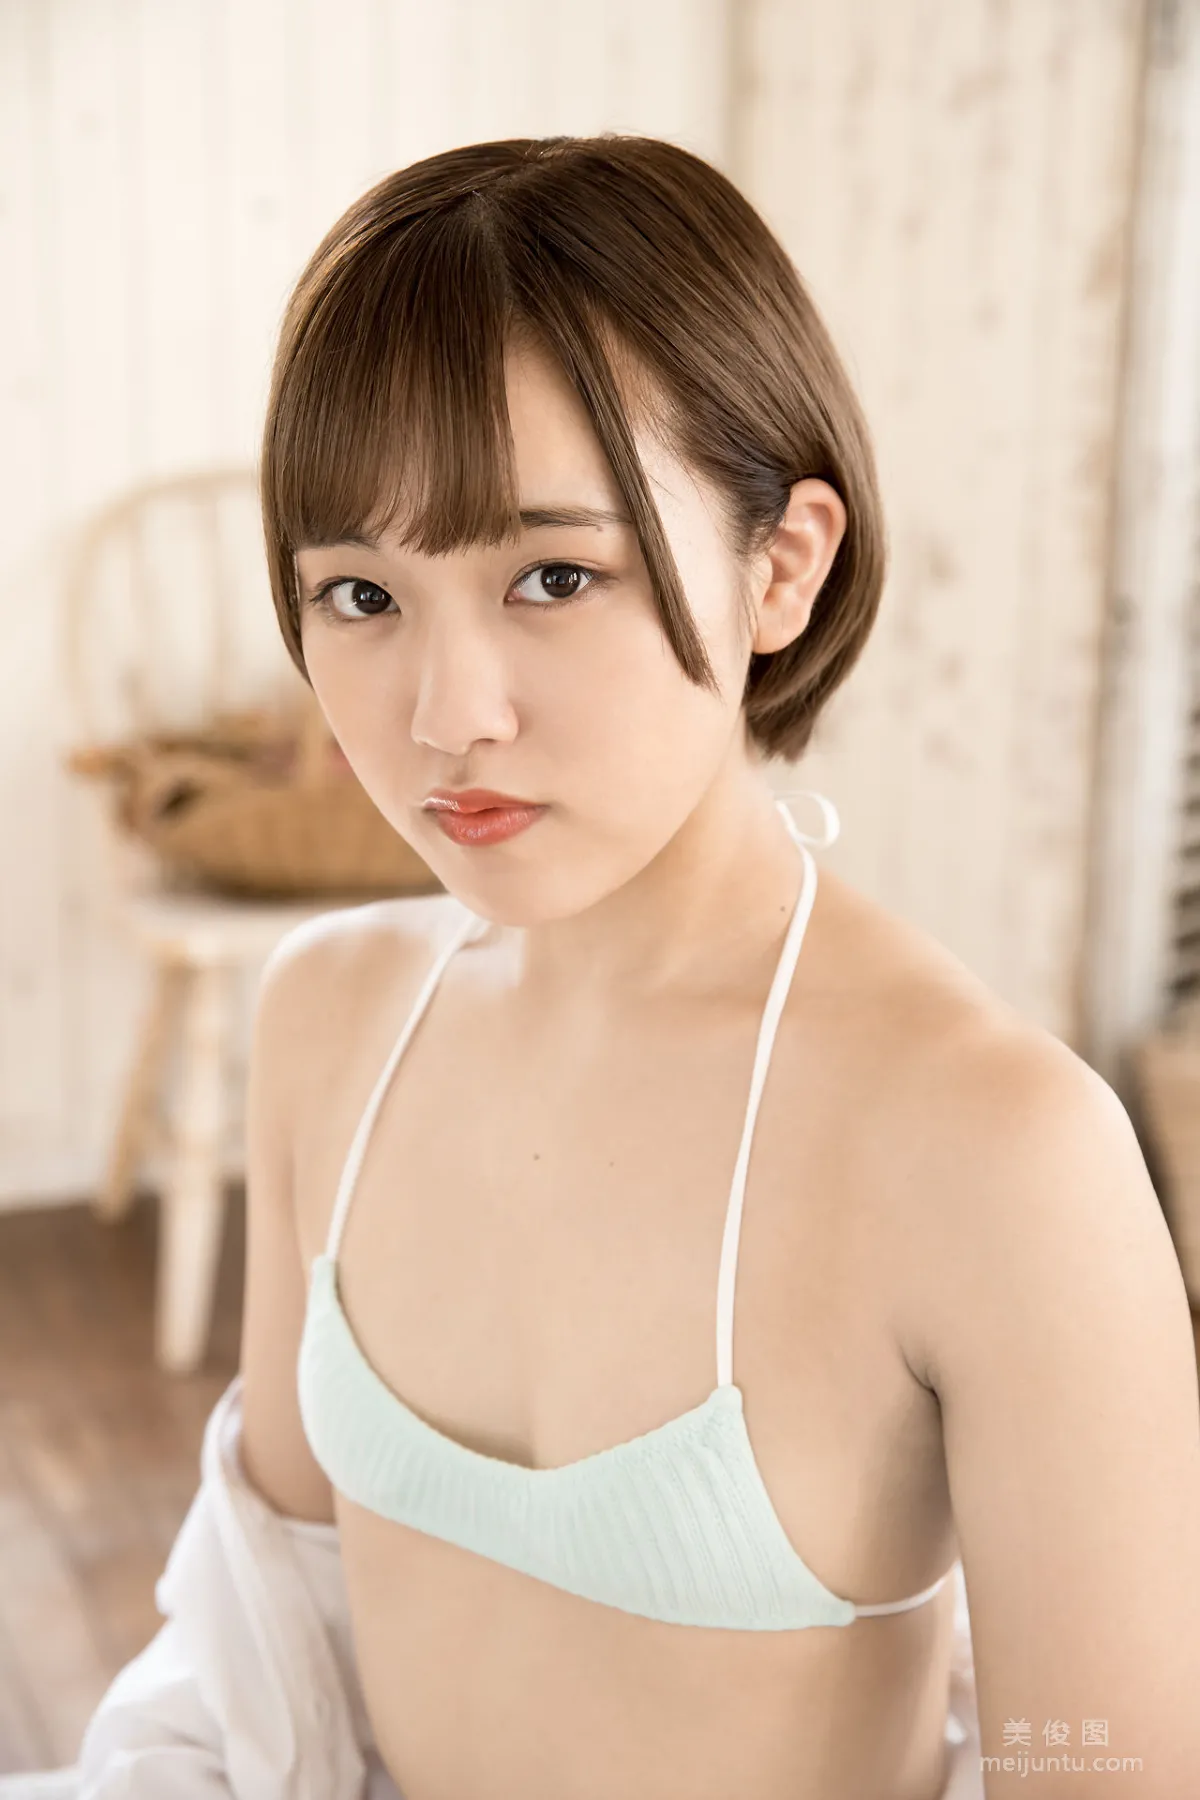 [Minisuka.tv] 香月りお - Special Gallery 13.15